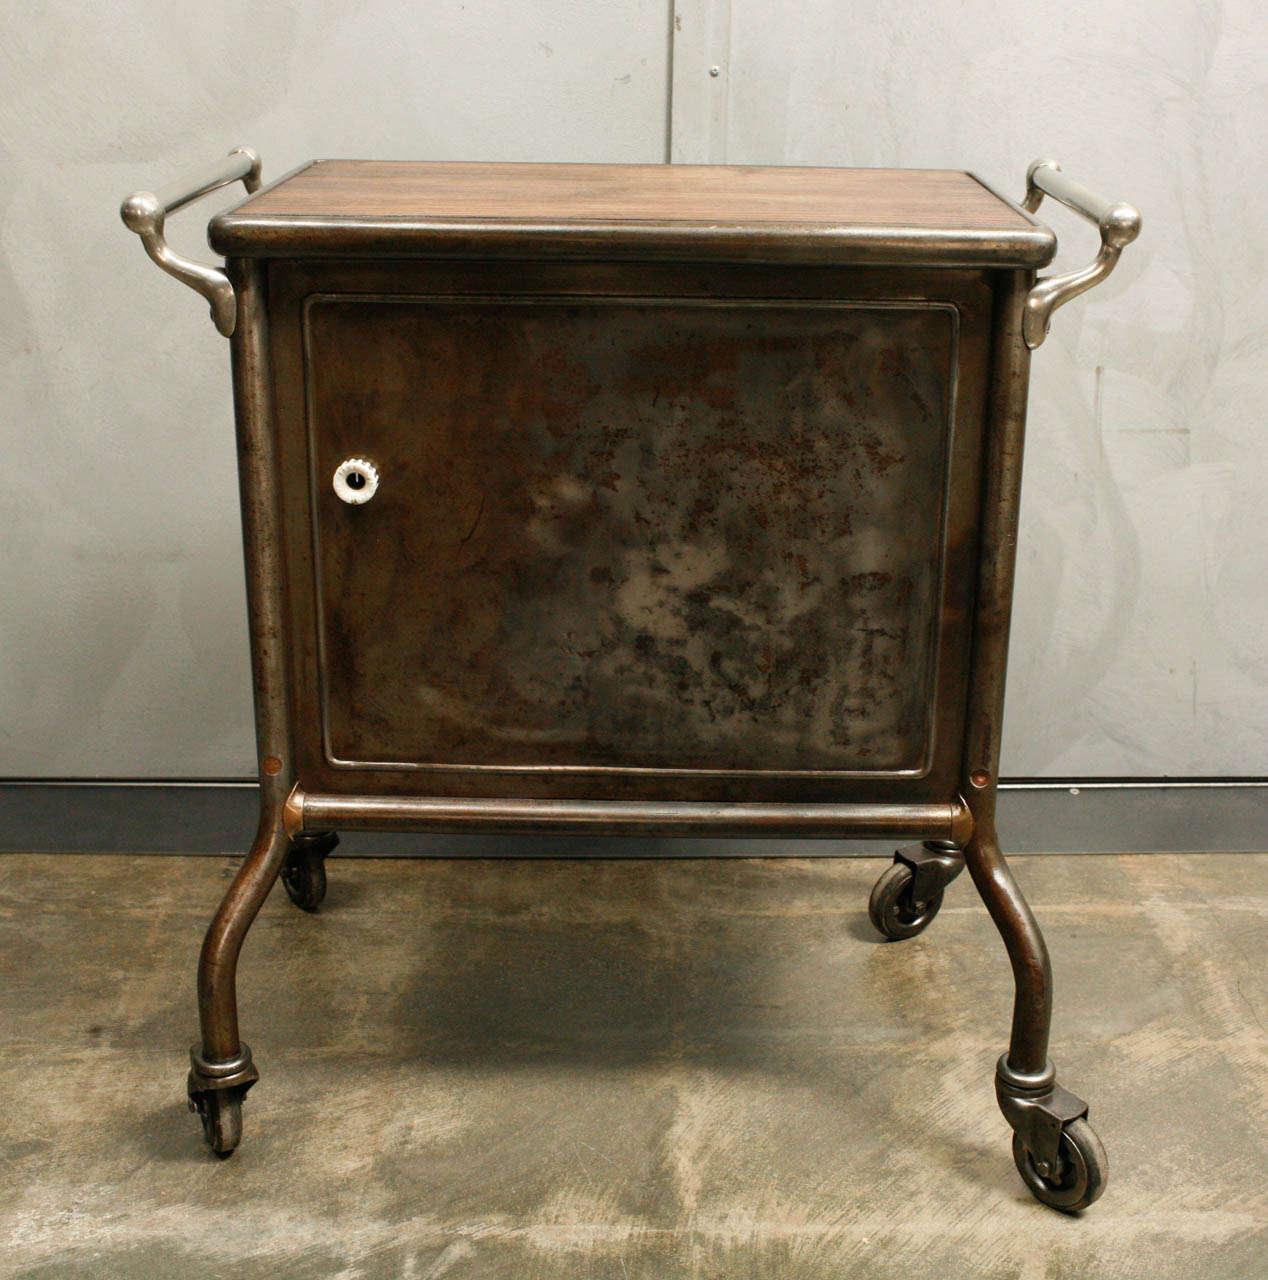 20th Century Industrial Metal Cabinet On Wheels With Wood Top